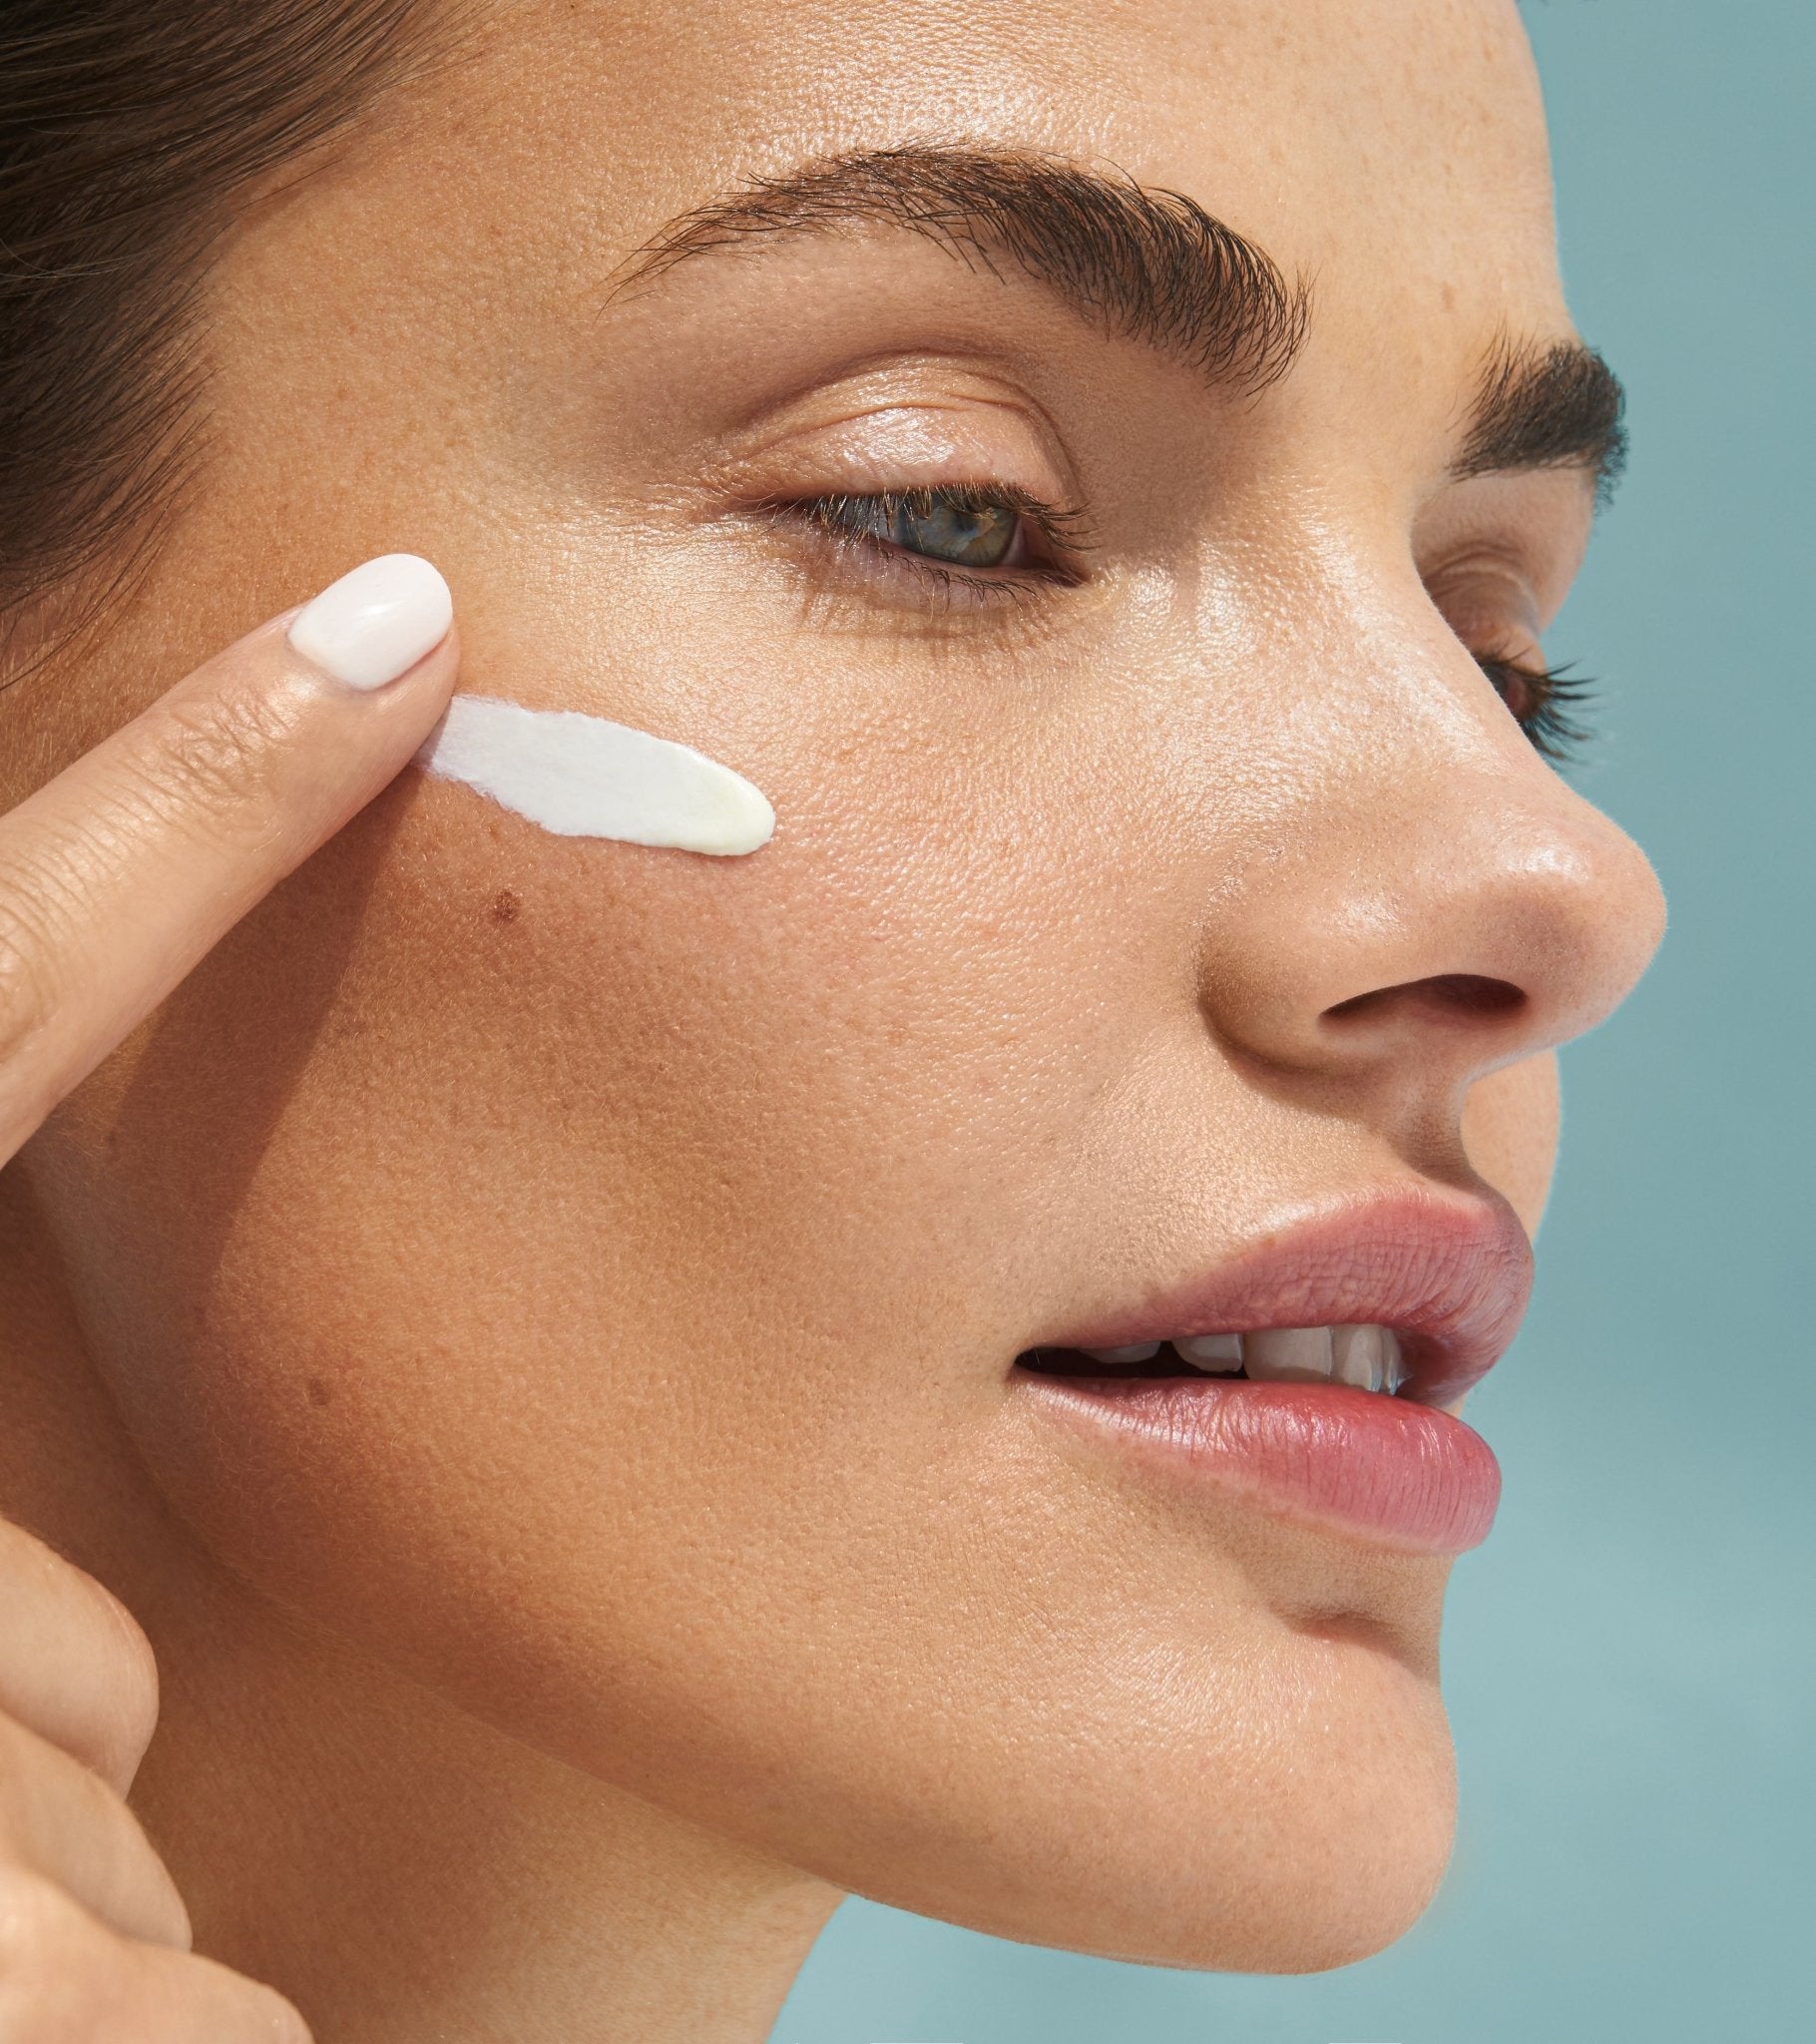 Slugging - A Clean Take On This Viral Skincare Trend - Secret Skin